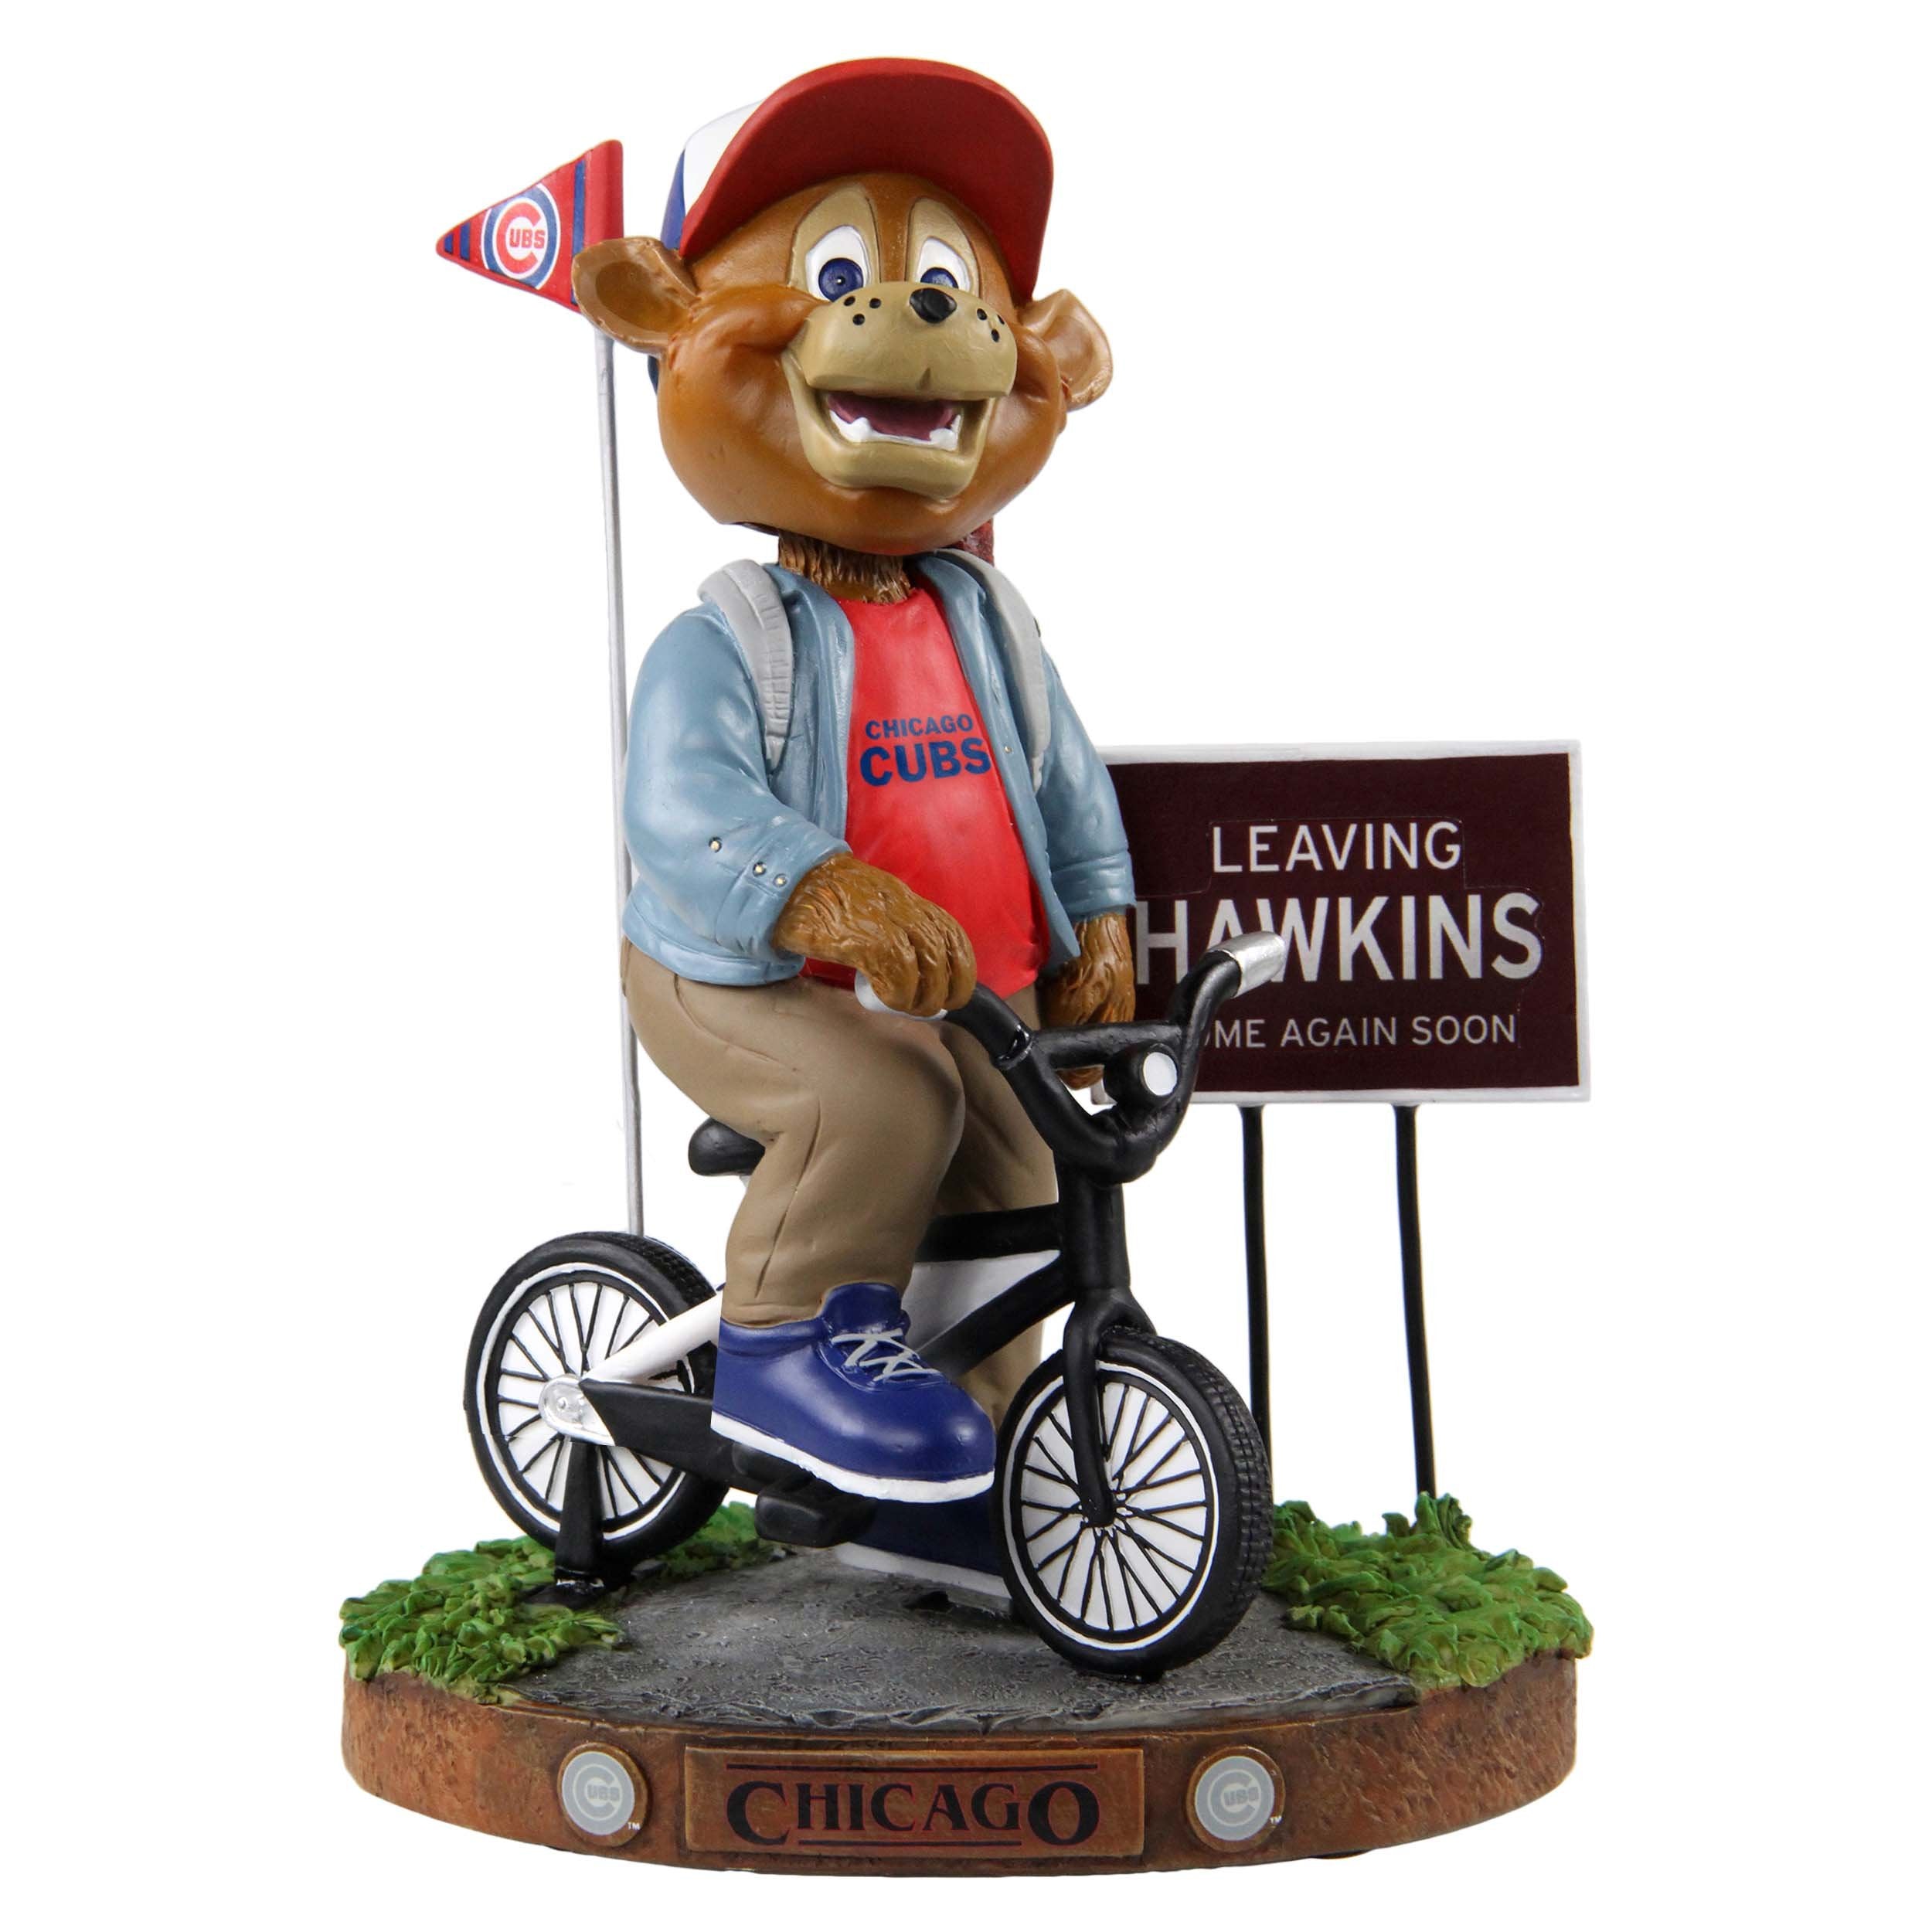 Clark Chicago Cubs Opening Day Mascot Bobblehead Officially Licensed by MLB